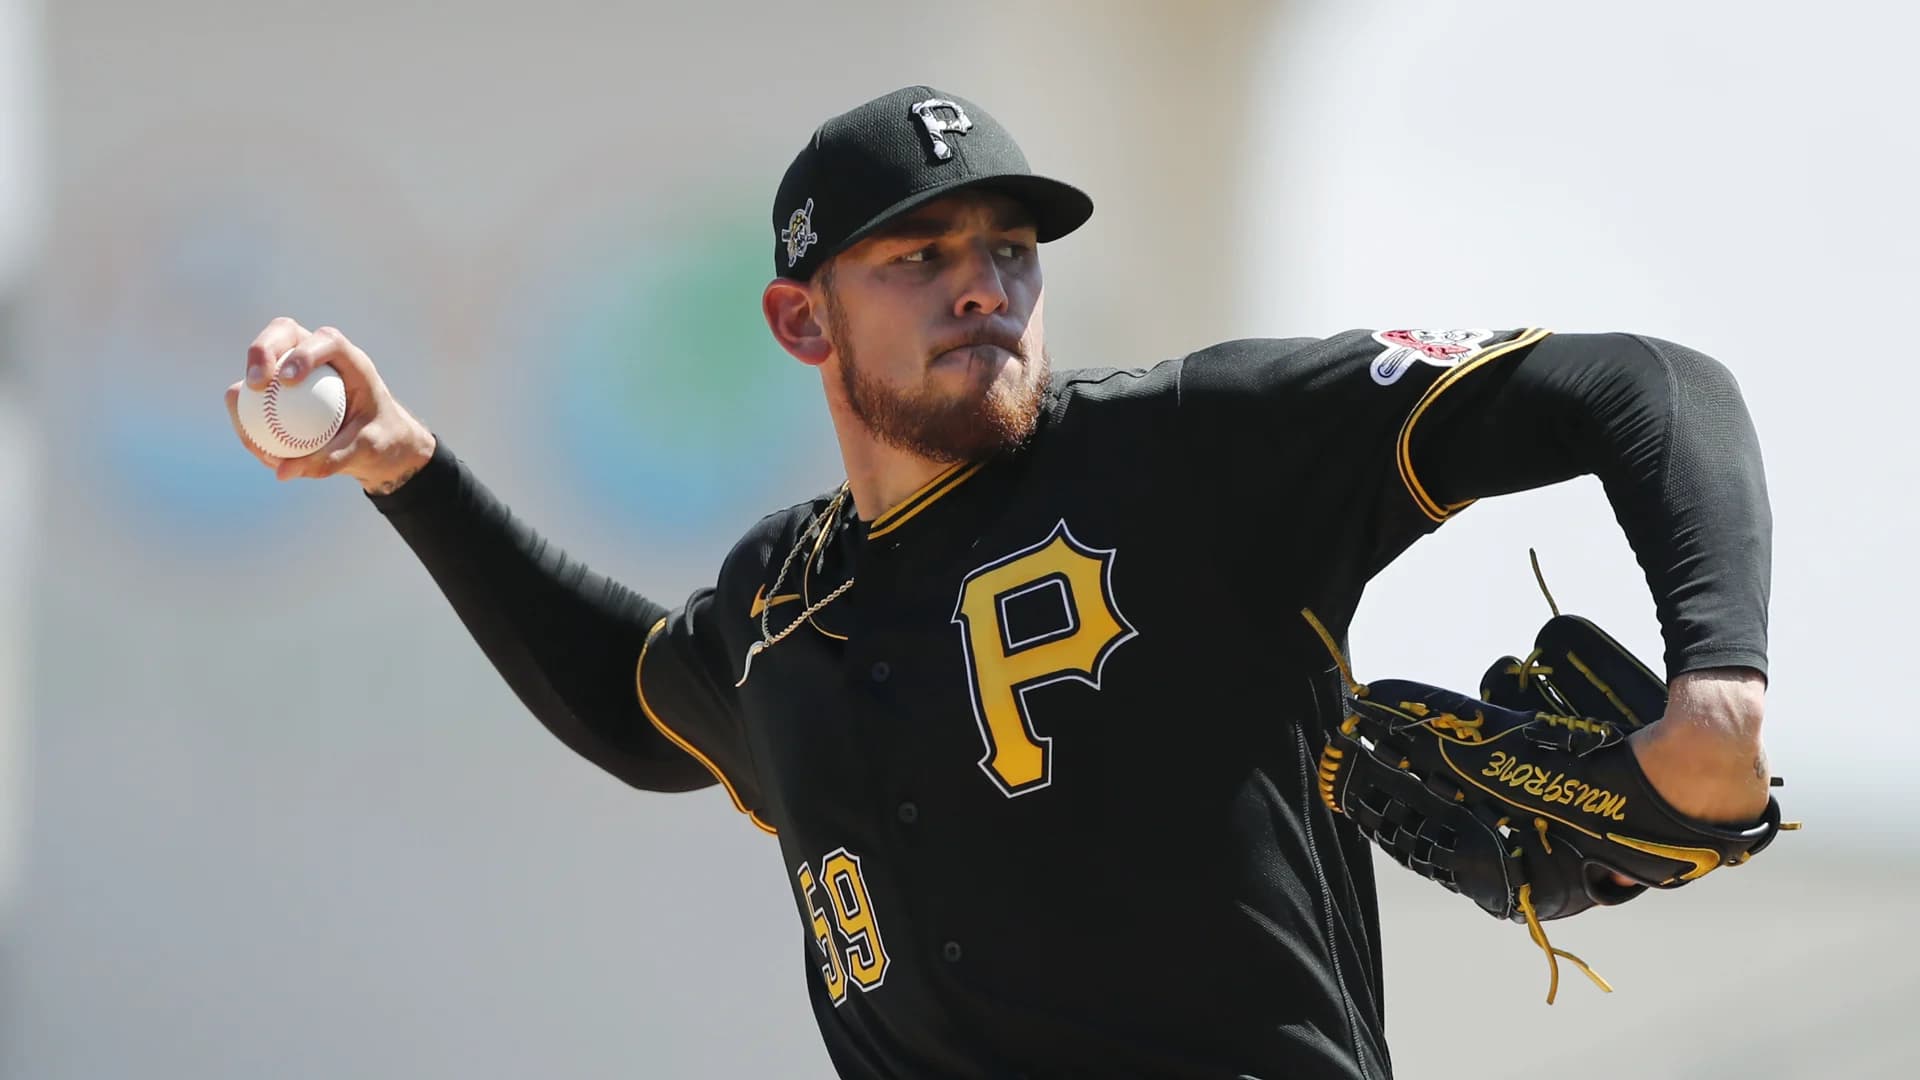 Taillon excited to reunite with Cole on the Yankees, push for playoffs